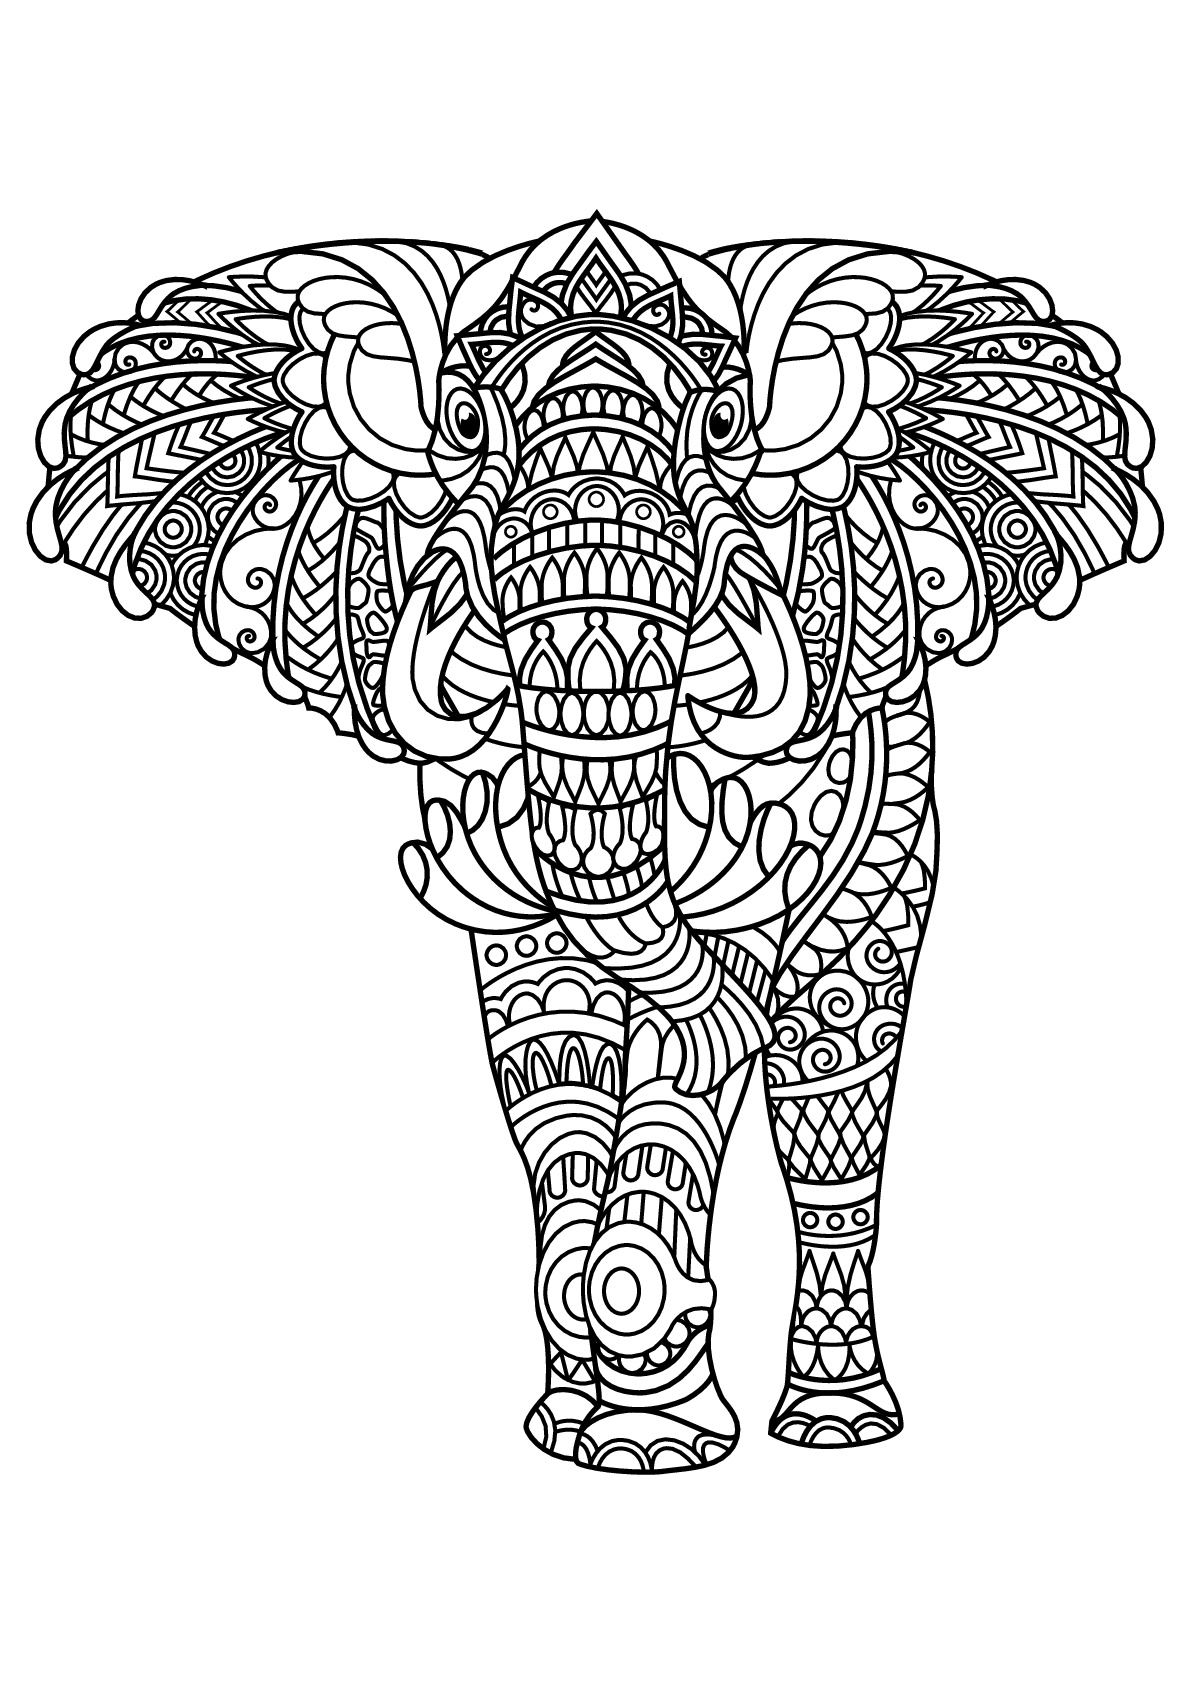 Free book elephant - Elephants Adult Coloring Pages